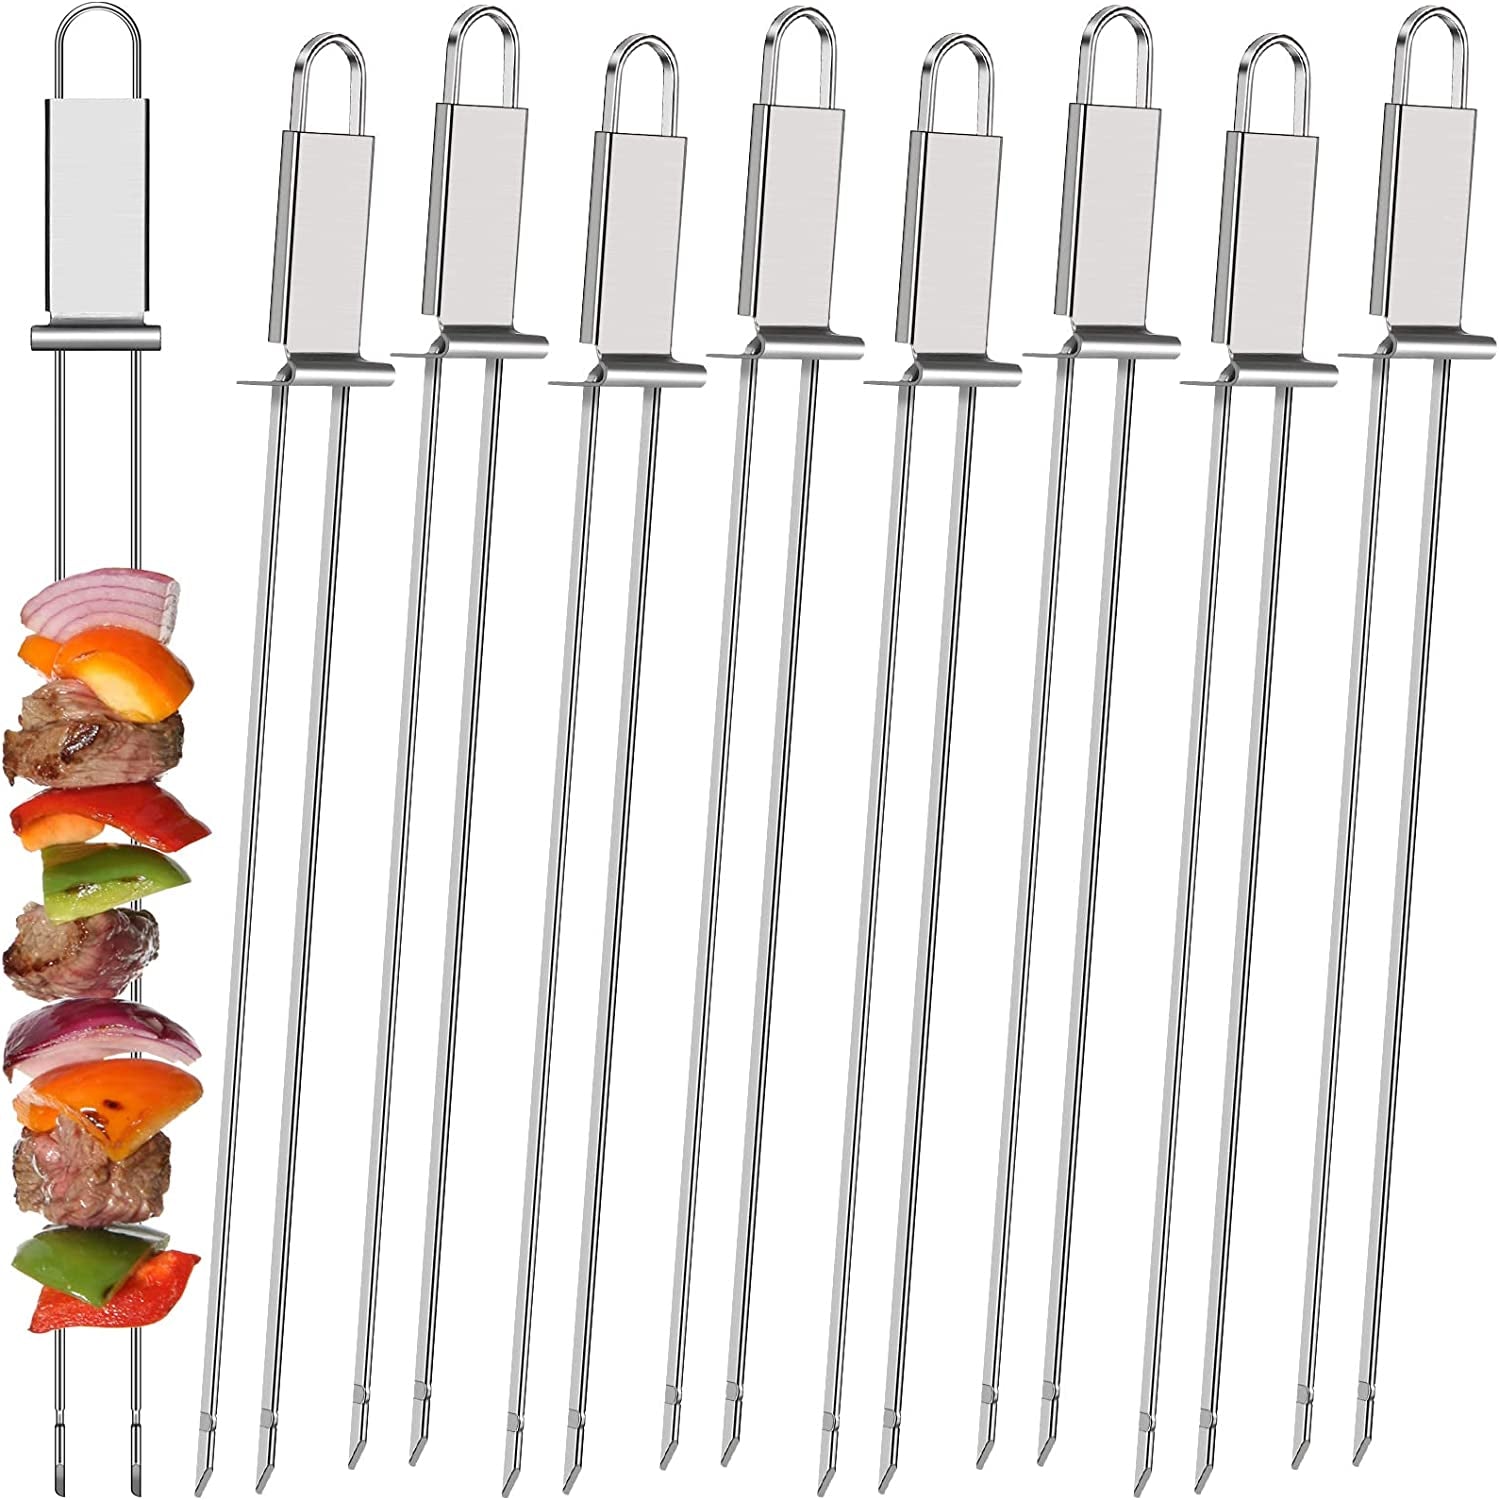 Lallisa, Lallisa Kabob Skewer for Grilling, Metal Stainless Steel BBQ Skewer Stick with Push Bar, Reusable Double Pronged Kebab Skewer Tool Quick Release Meat, Chicken, Vegetable and Fruit (9 Pieces)